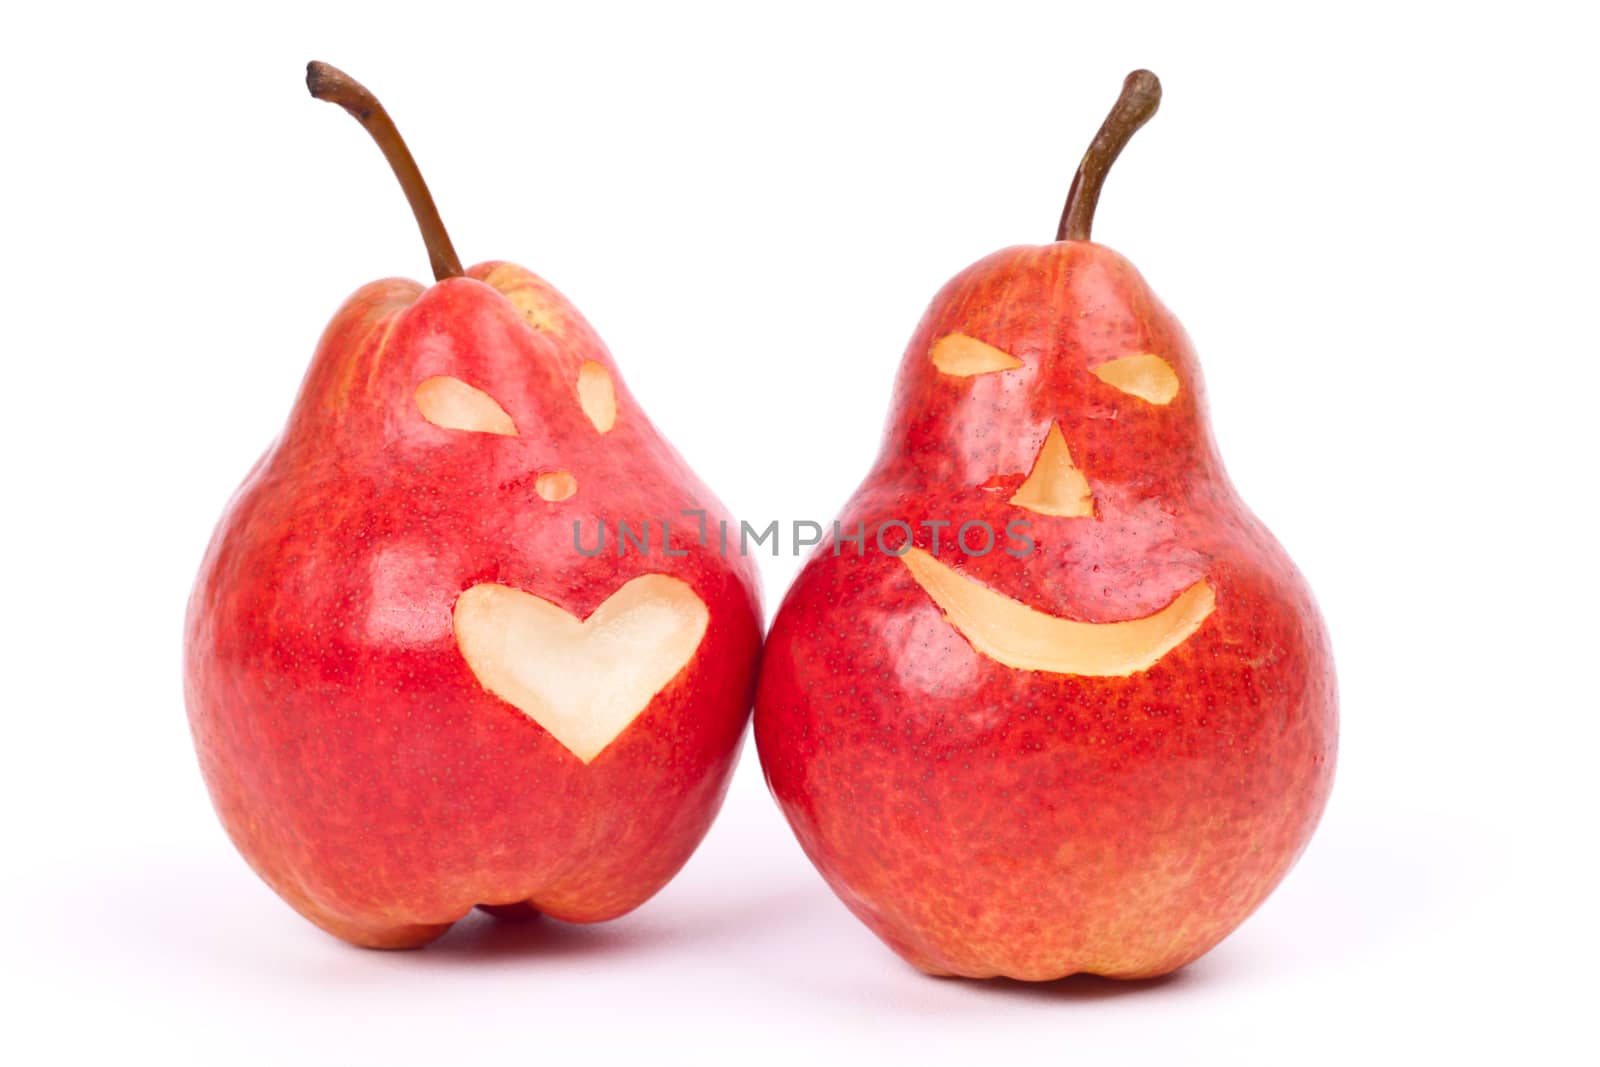 two red pears with eyes and mouth on a light background